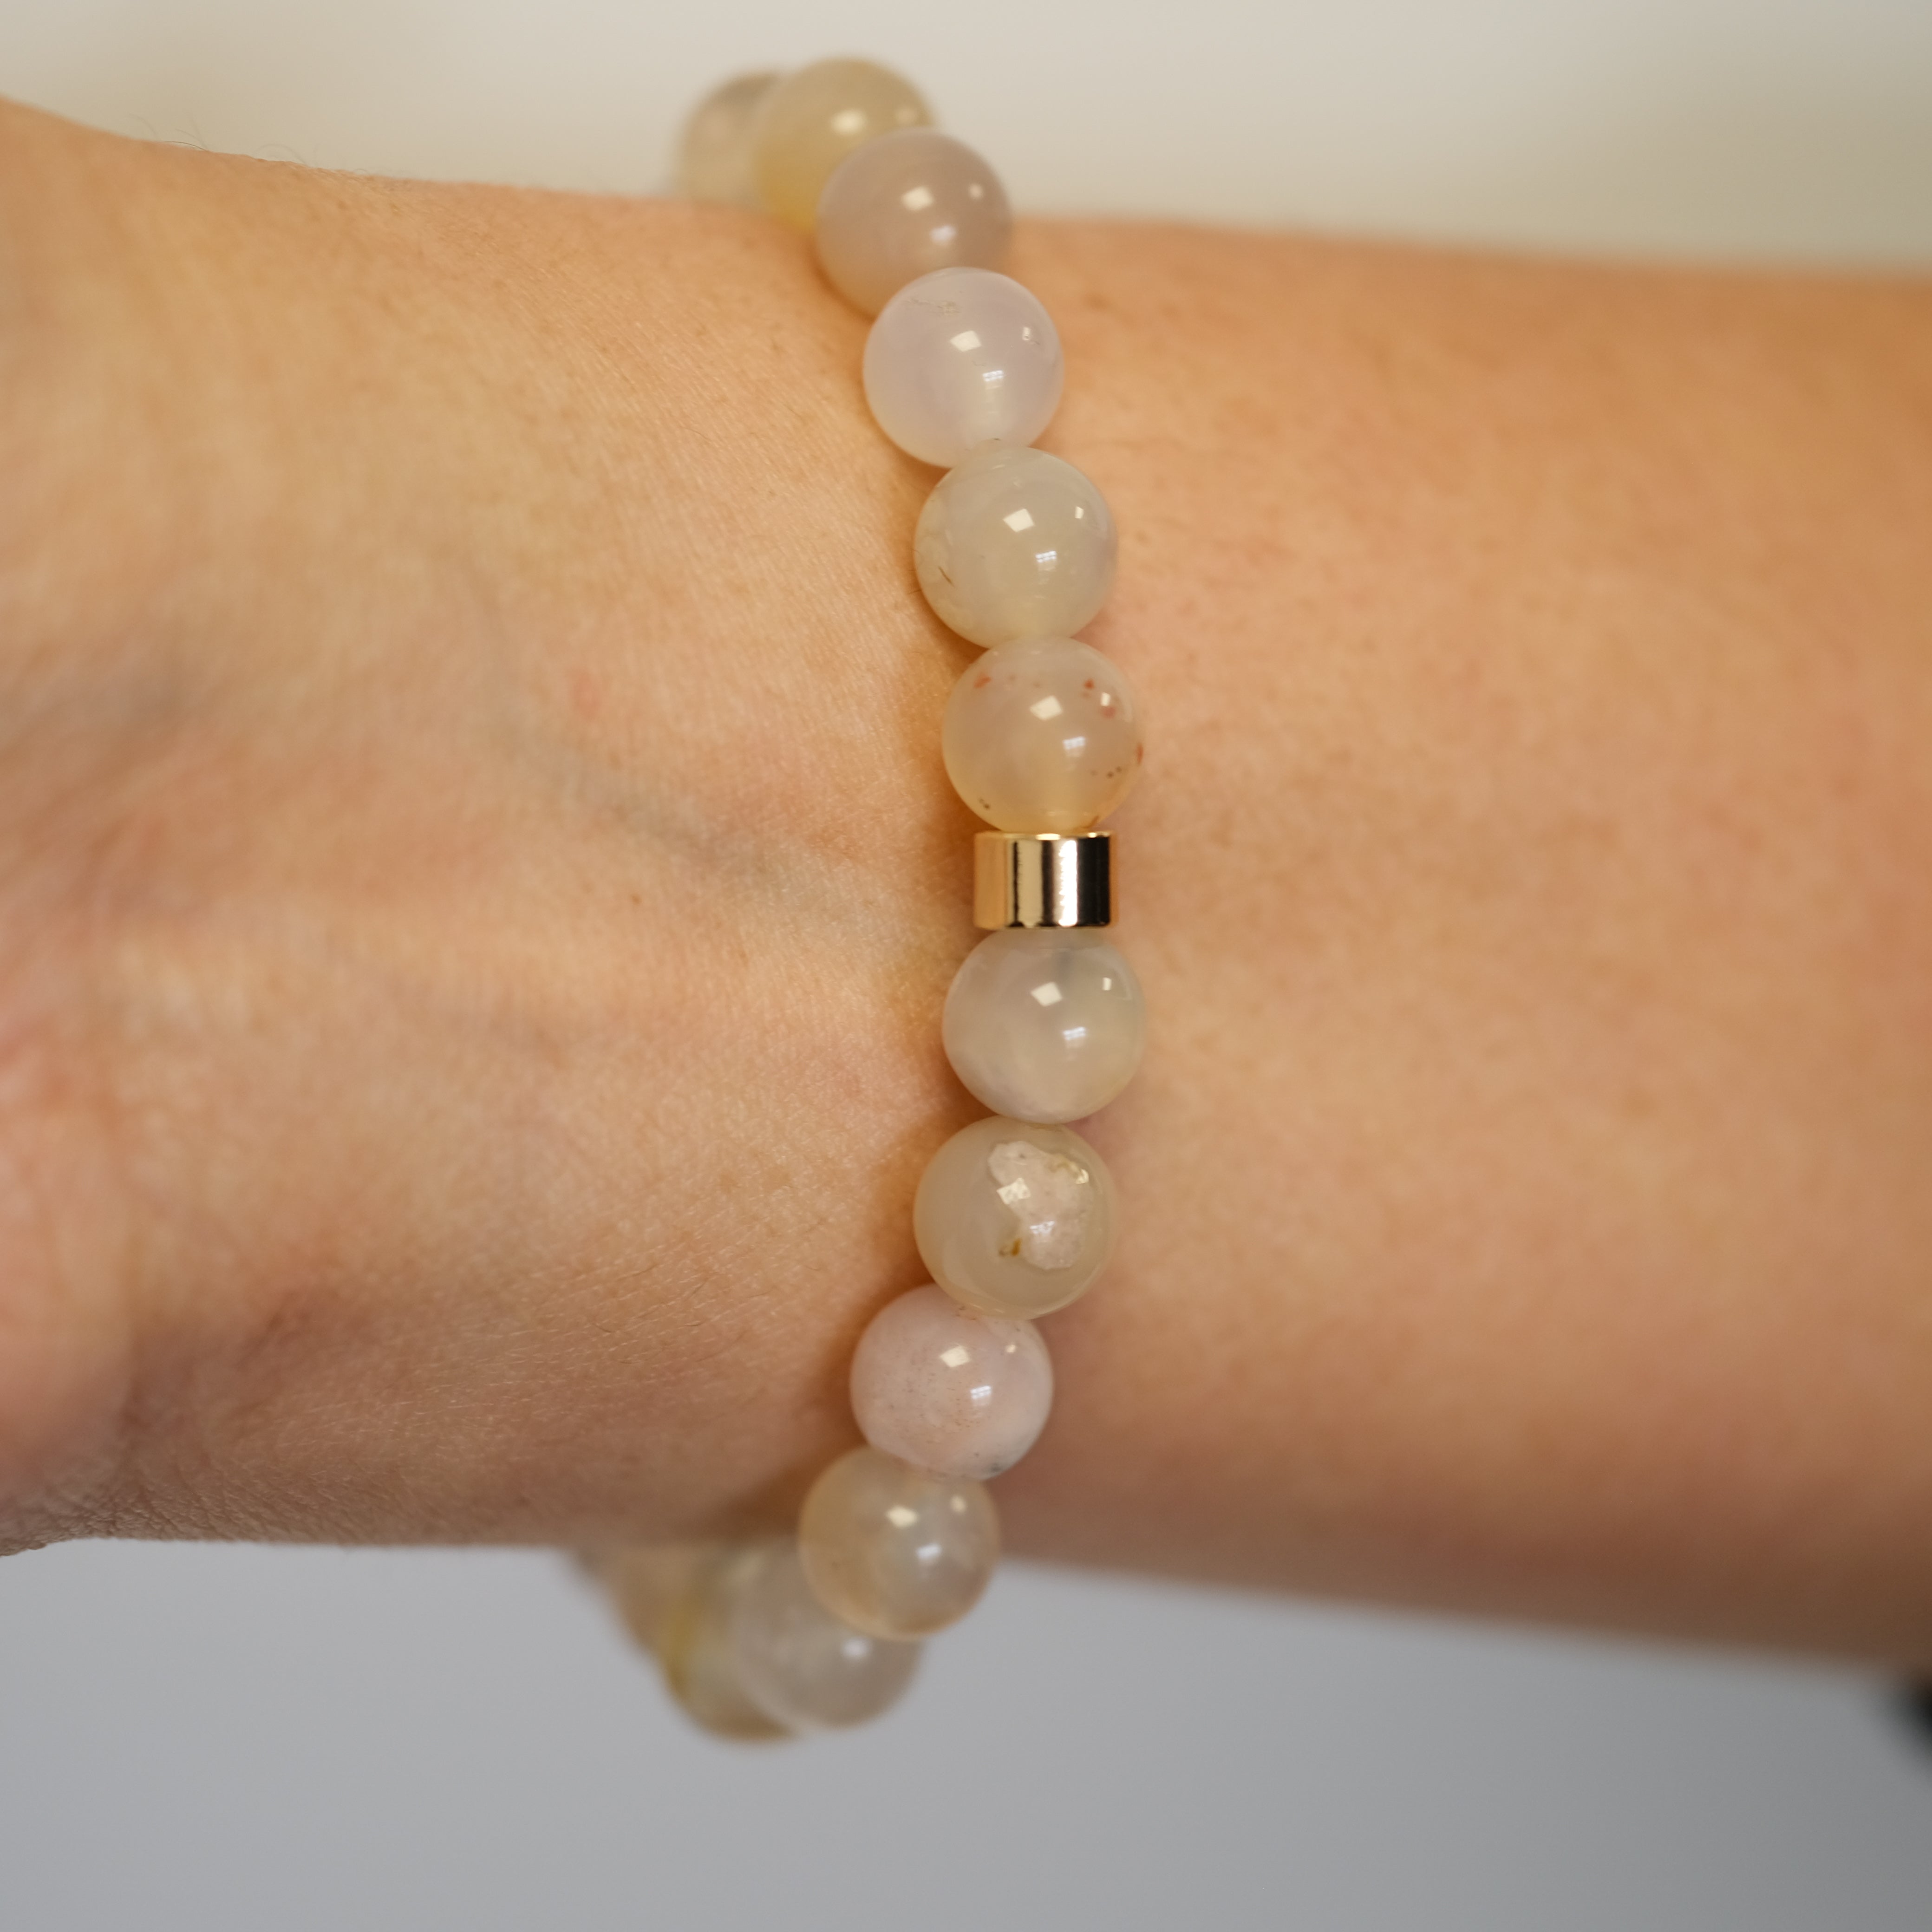 A Flower Blossom Agate gemstone bracelet with gold accessories on a model's wrist from the back